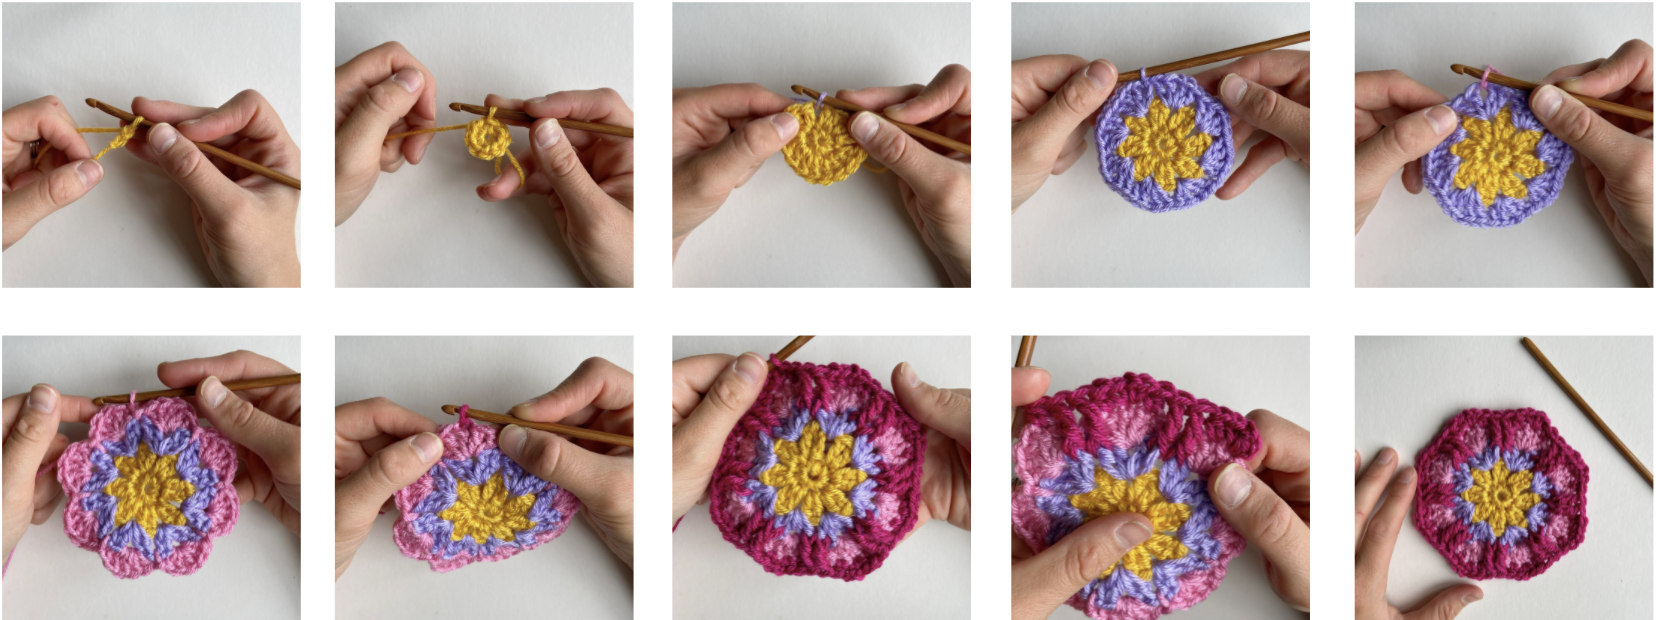 10 step by step images of how to crochet an octagon crochet flower motif